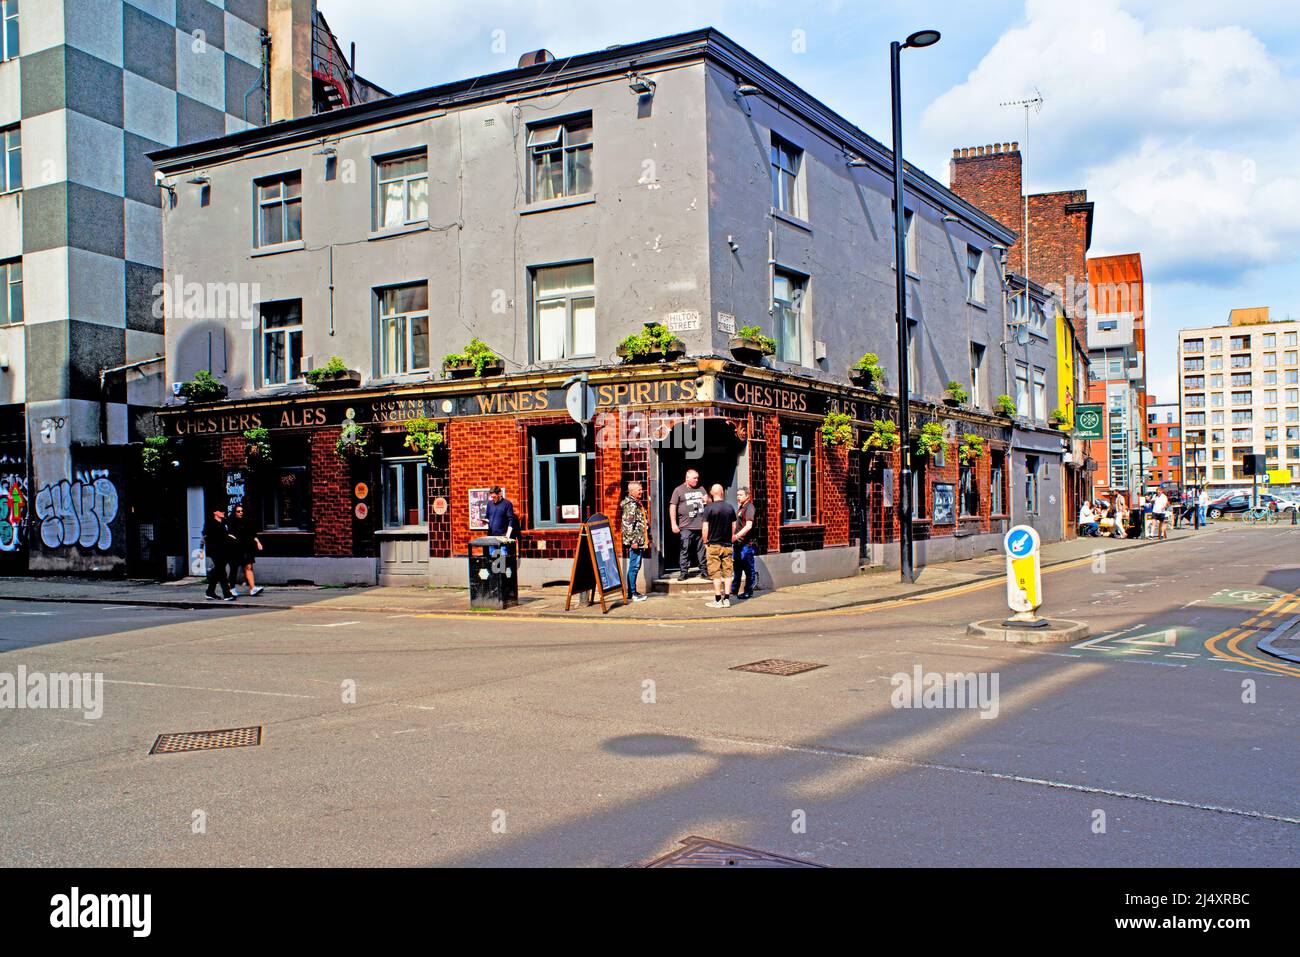 The Crown and Anchor Pub, Hilton Street, Manchester, England Stockfoto